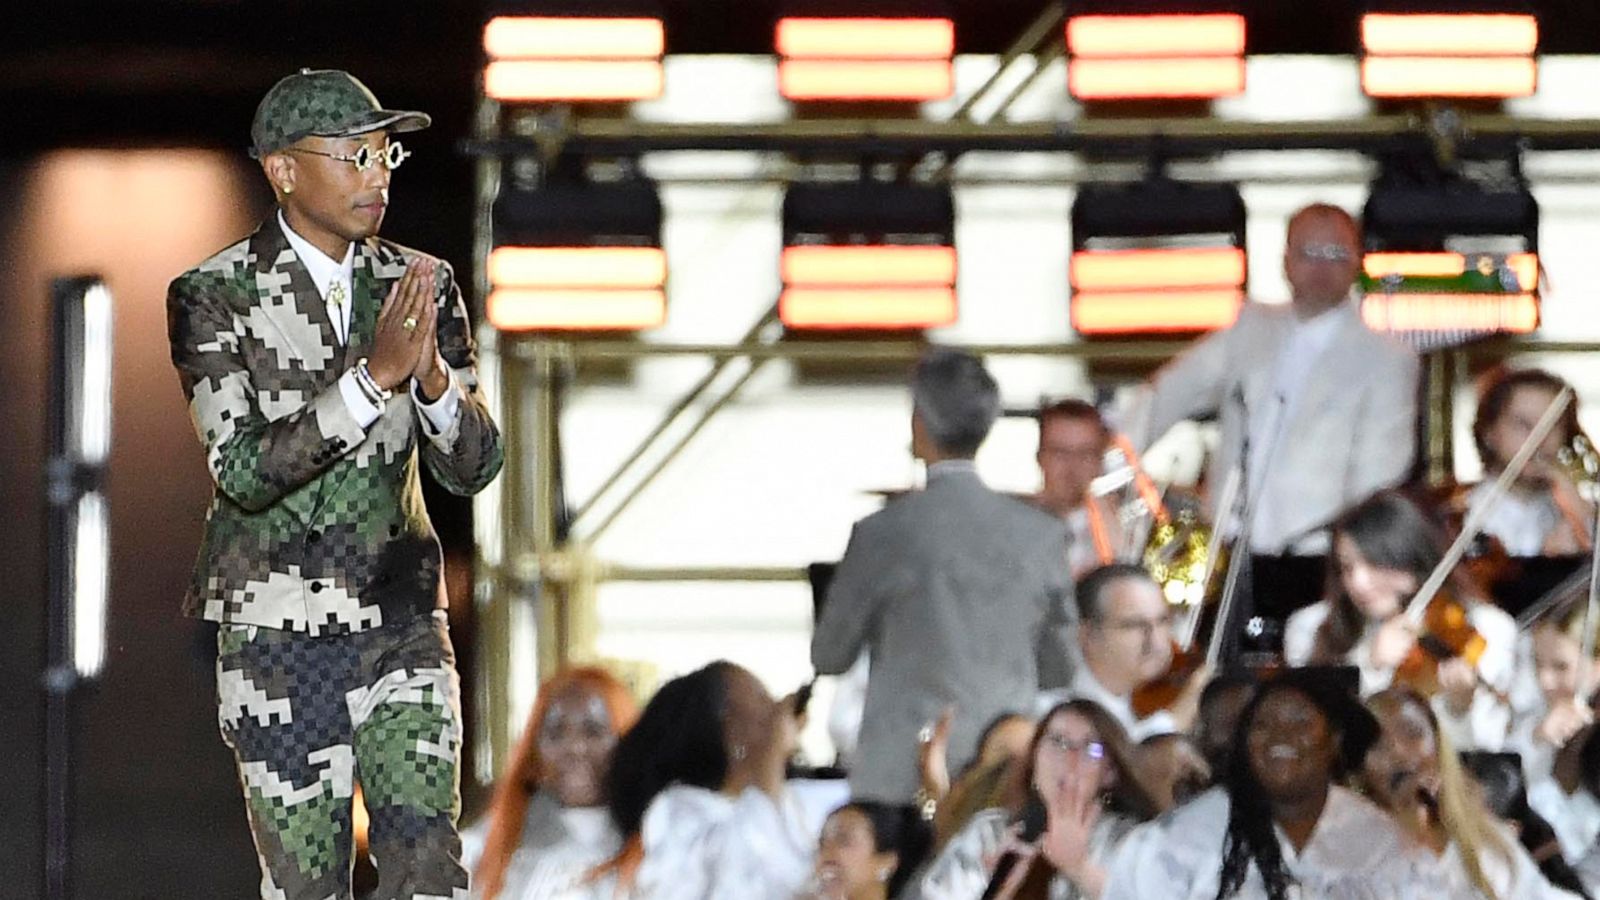 We Reviewed Pharrell Williams' Louis Vuitton Collection